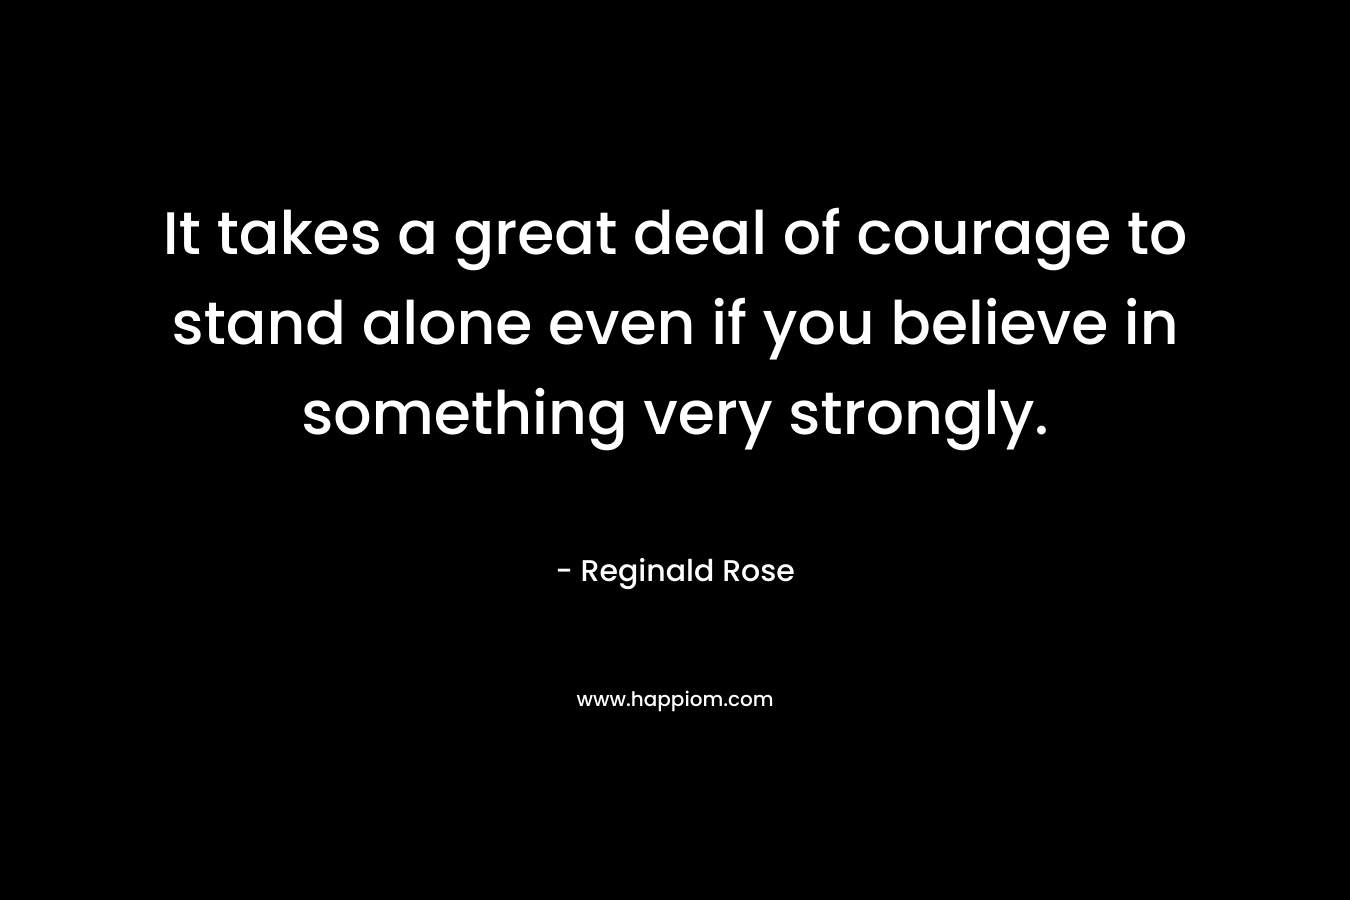 It takes a great deal of courage to stand alone even if you believe in something very strongly. – Reginald Rose